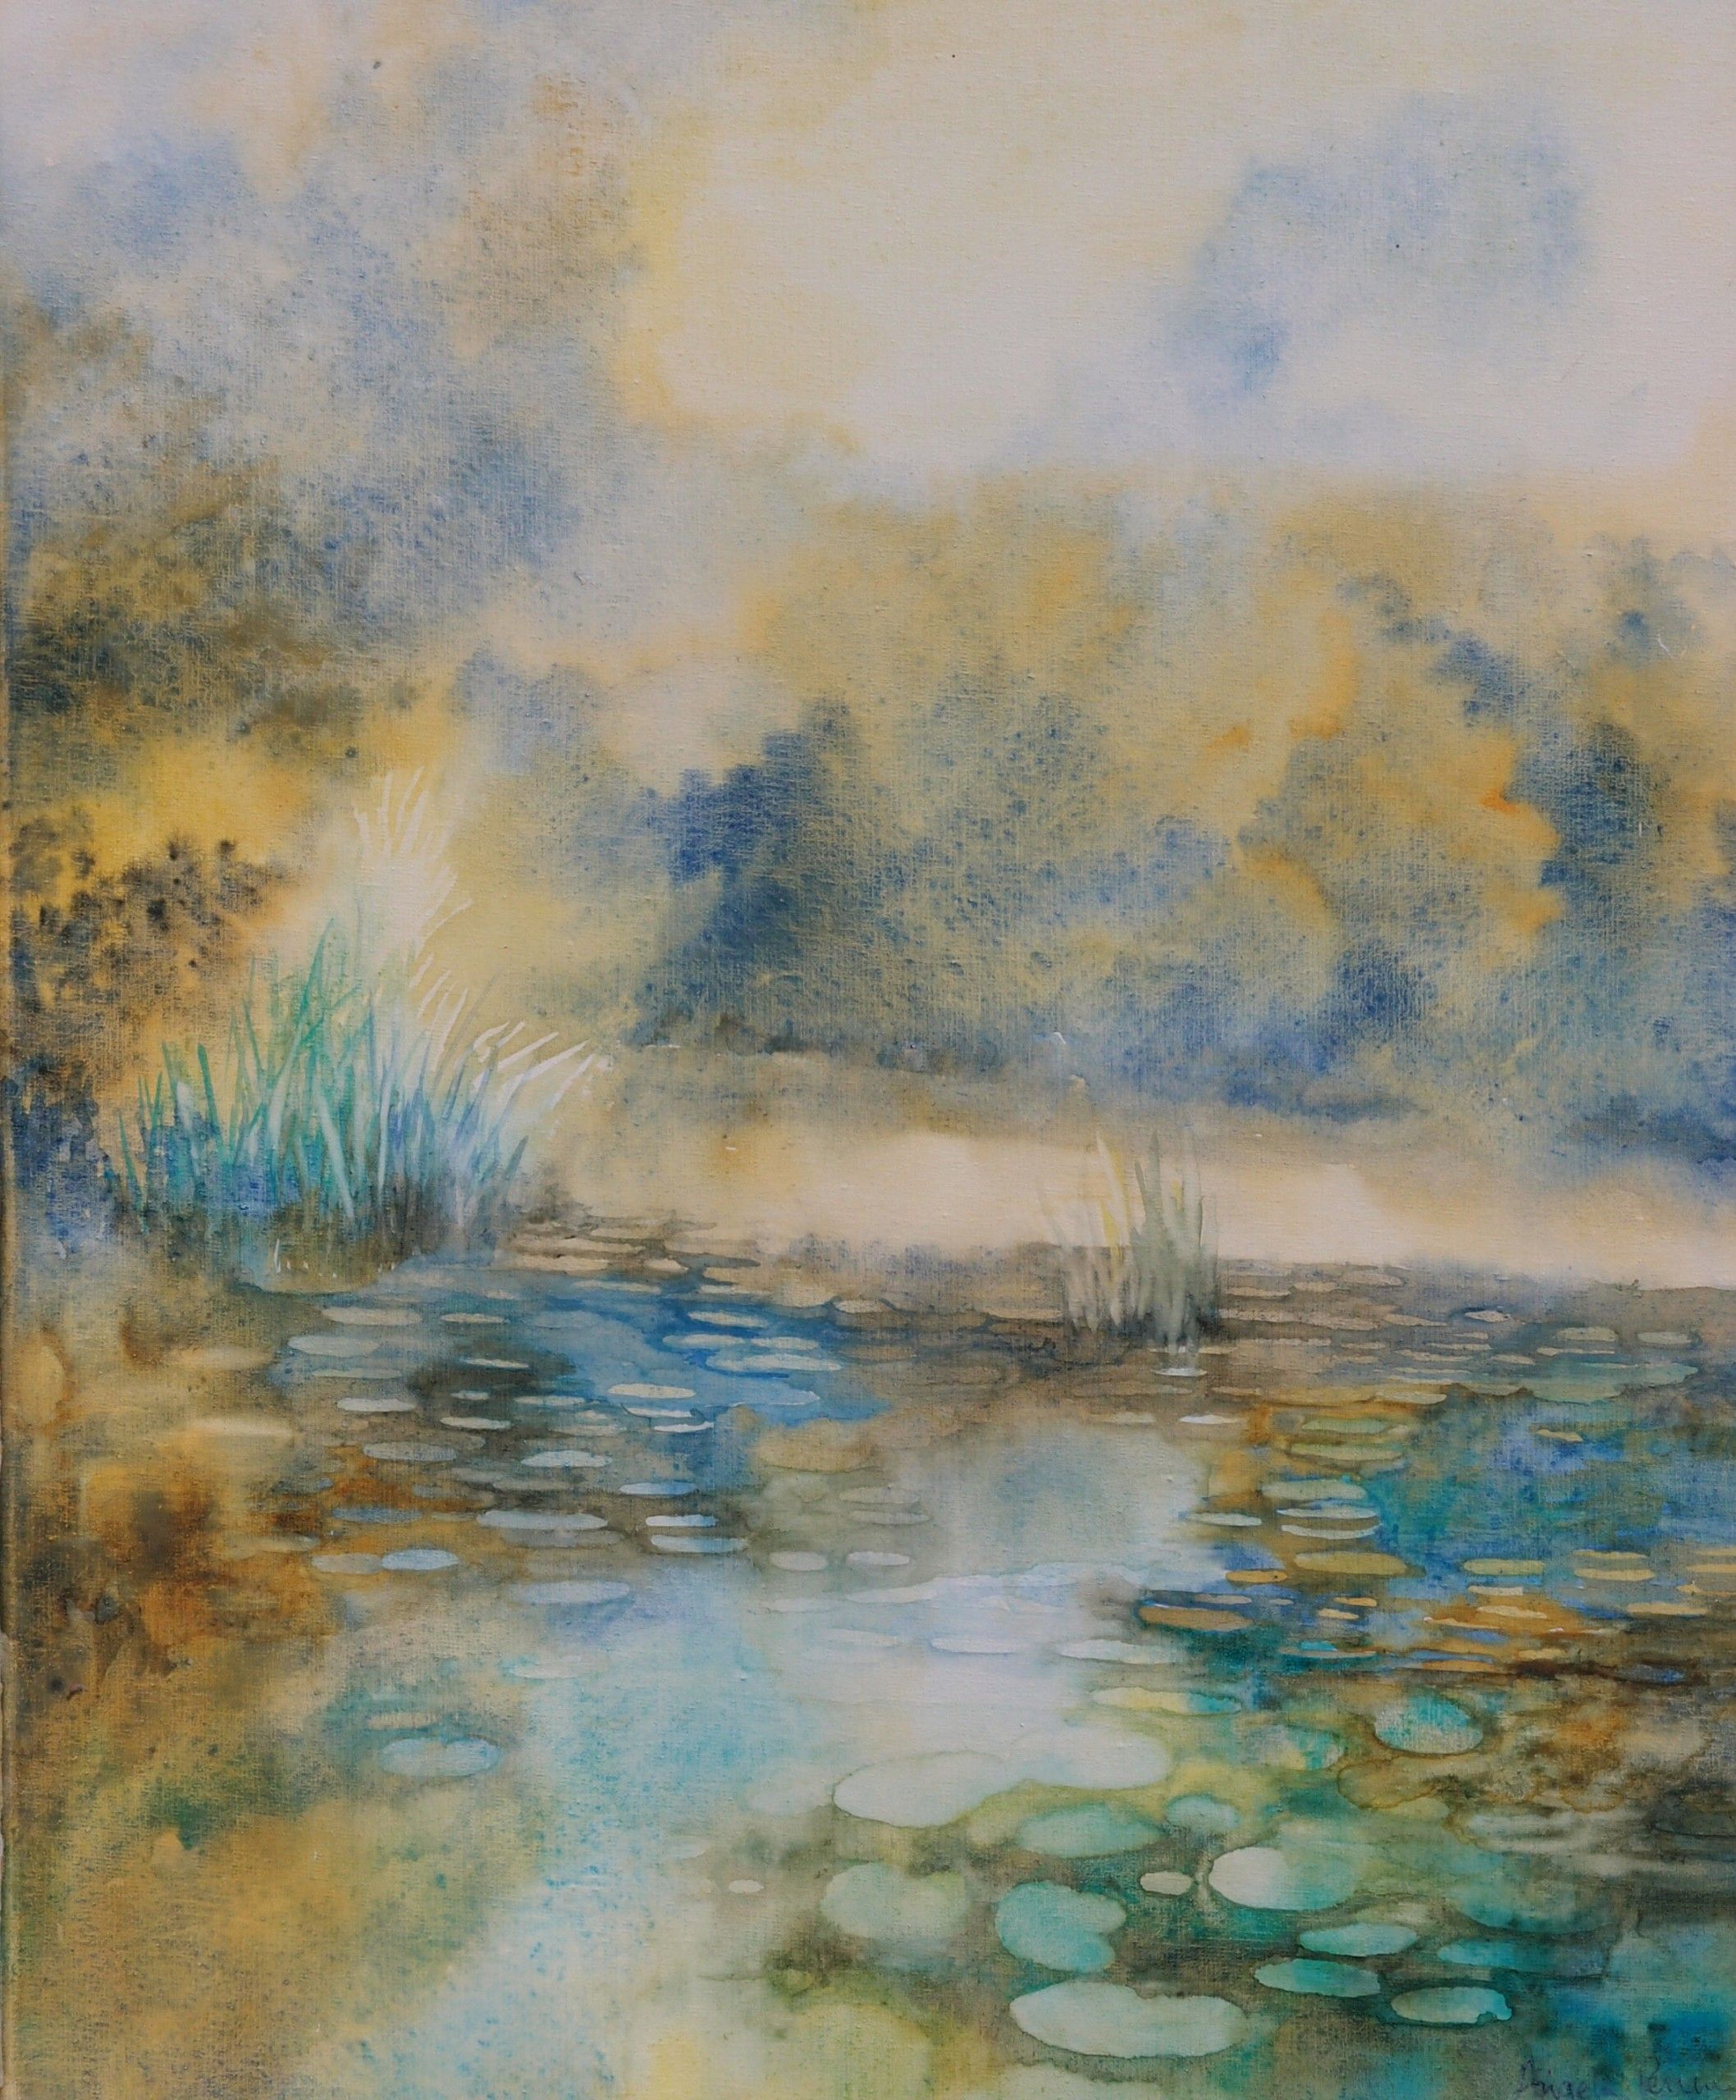 Gathering Water Lilies by Angela Perrin